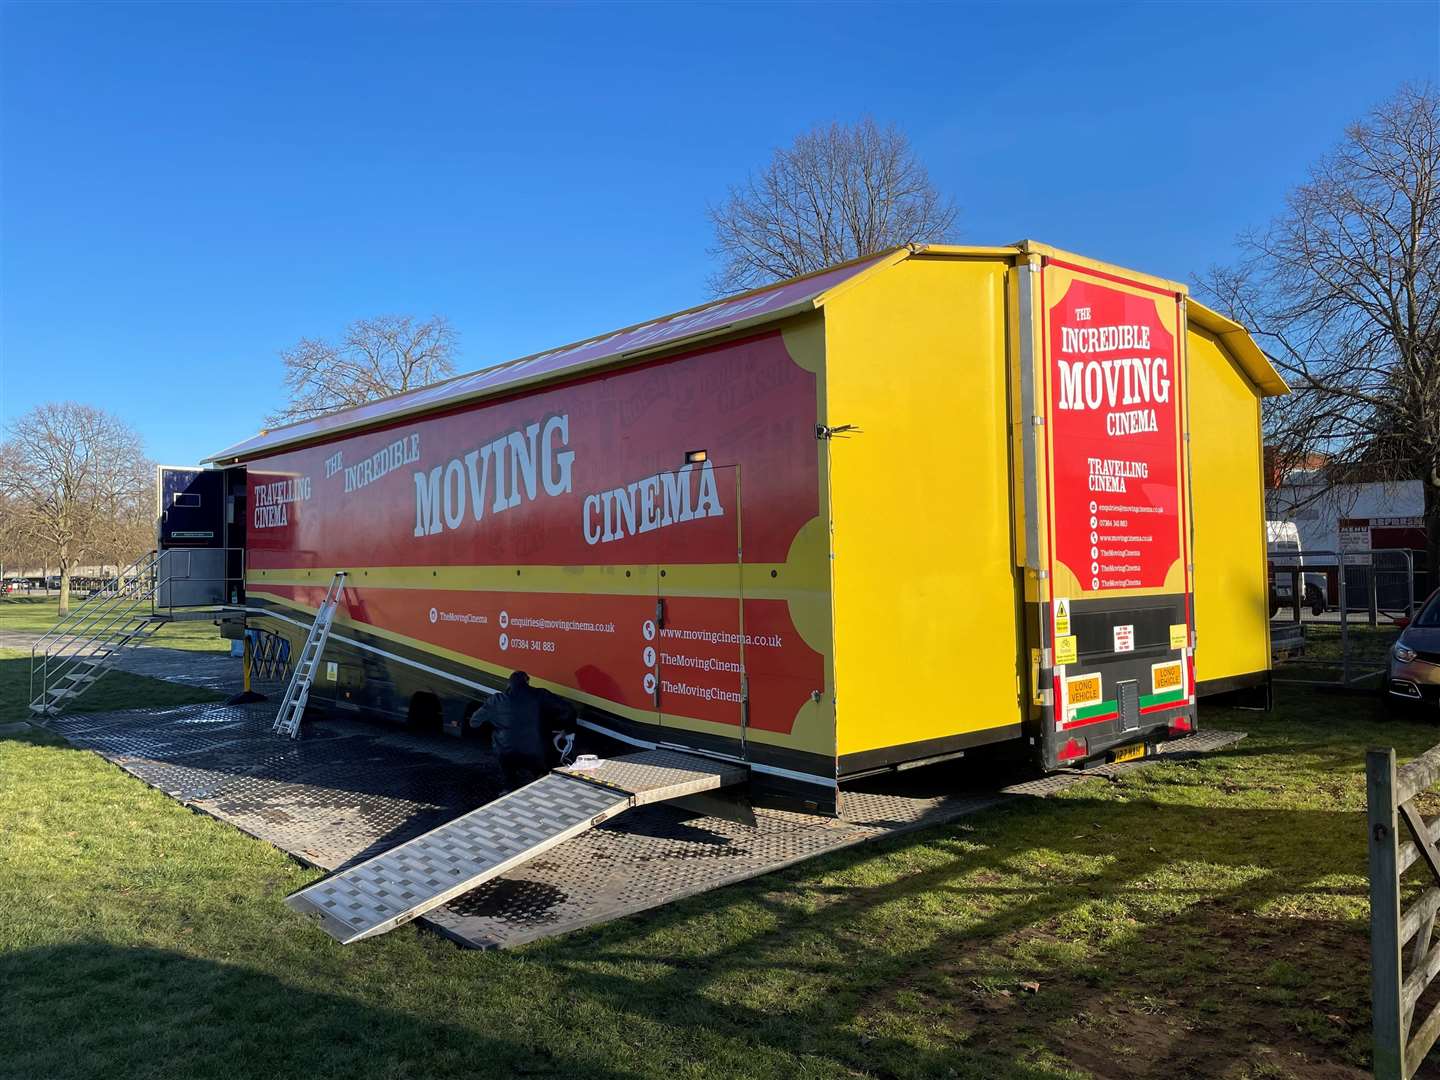 The mobile cinema was stationed on The Severals in Newmarket